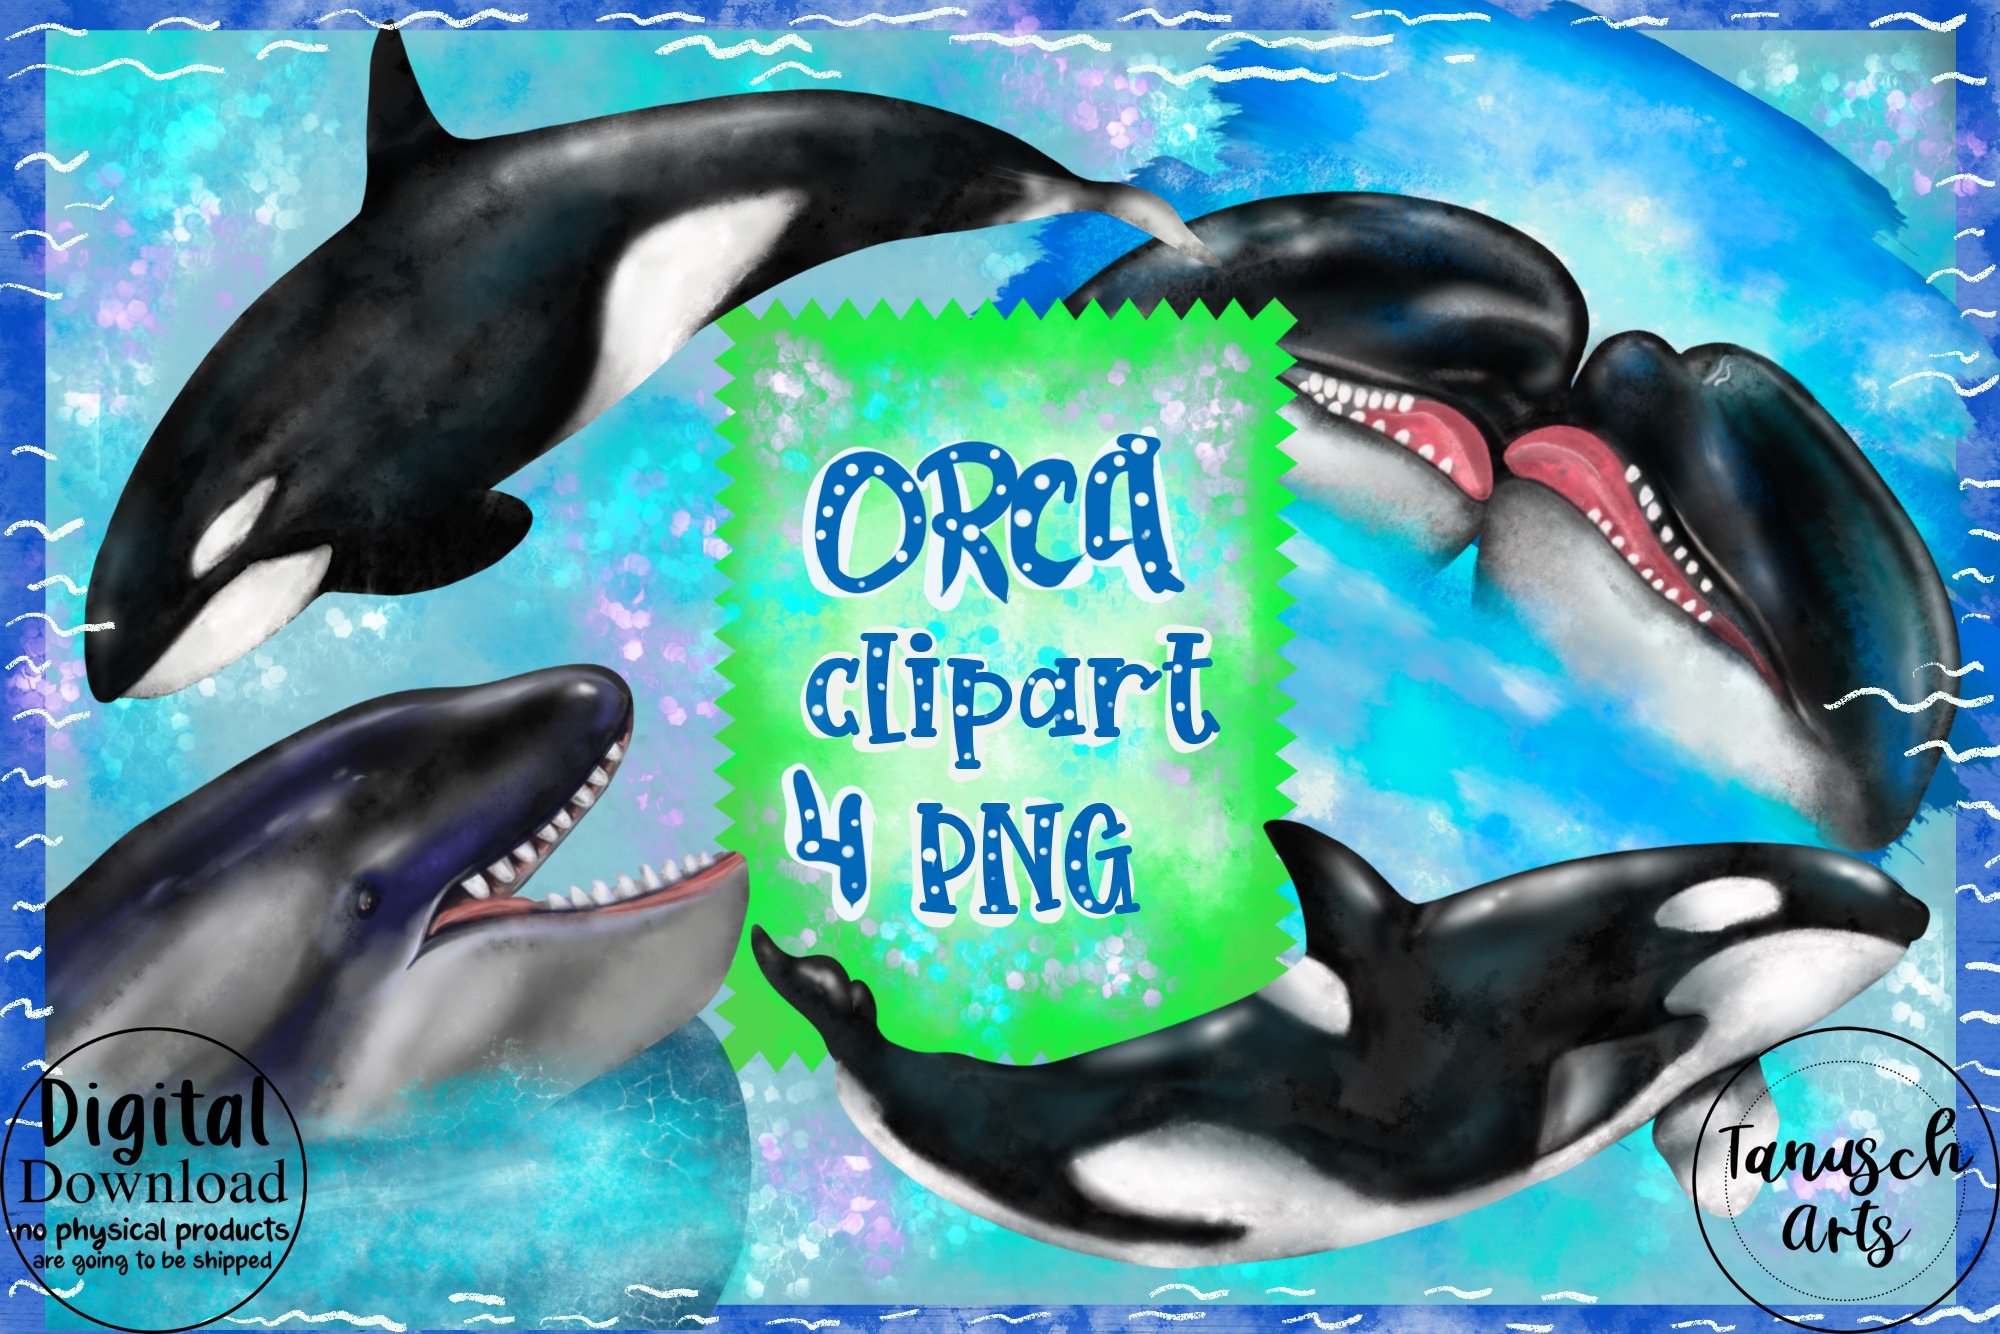 ORCA Clipart Lovely Killer Whale cover image.